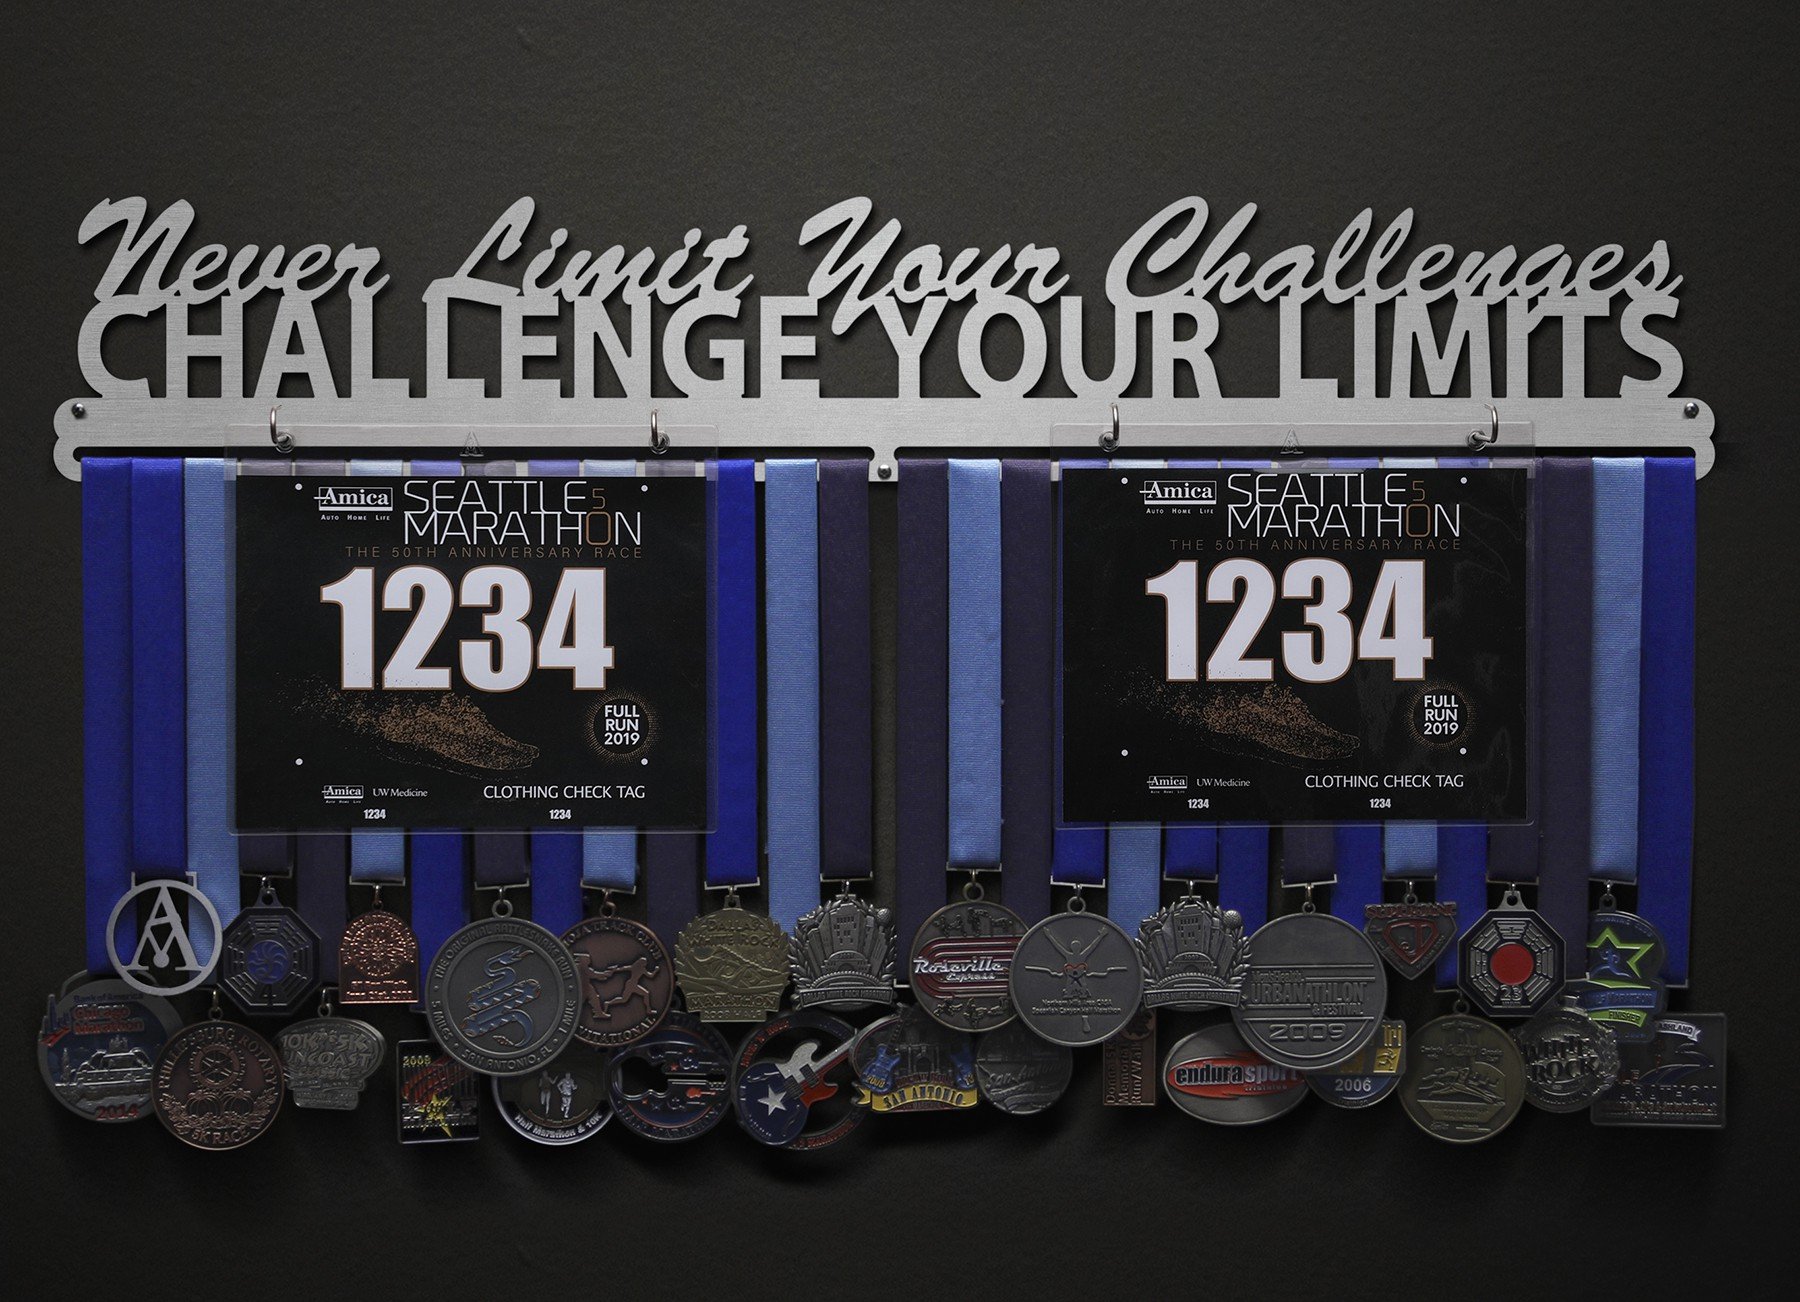 Challenge Your Limits Bib and Medal Display